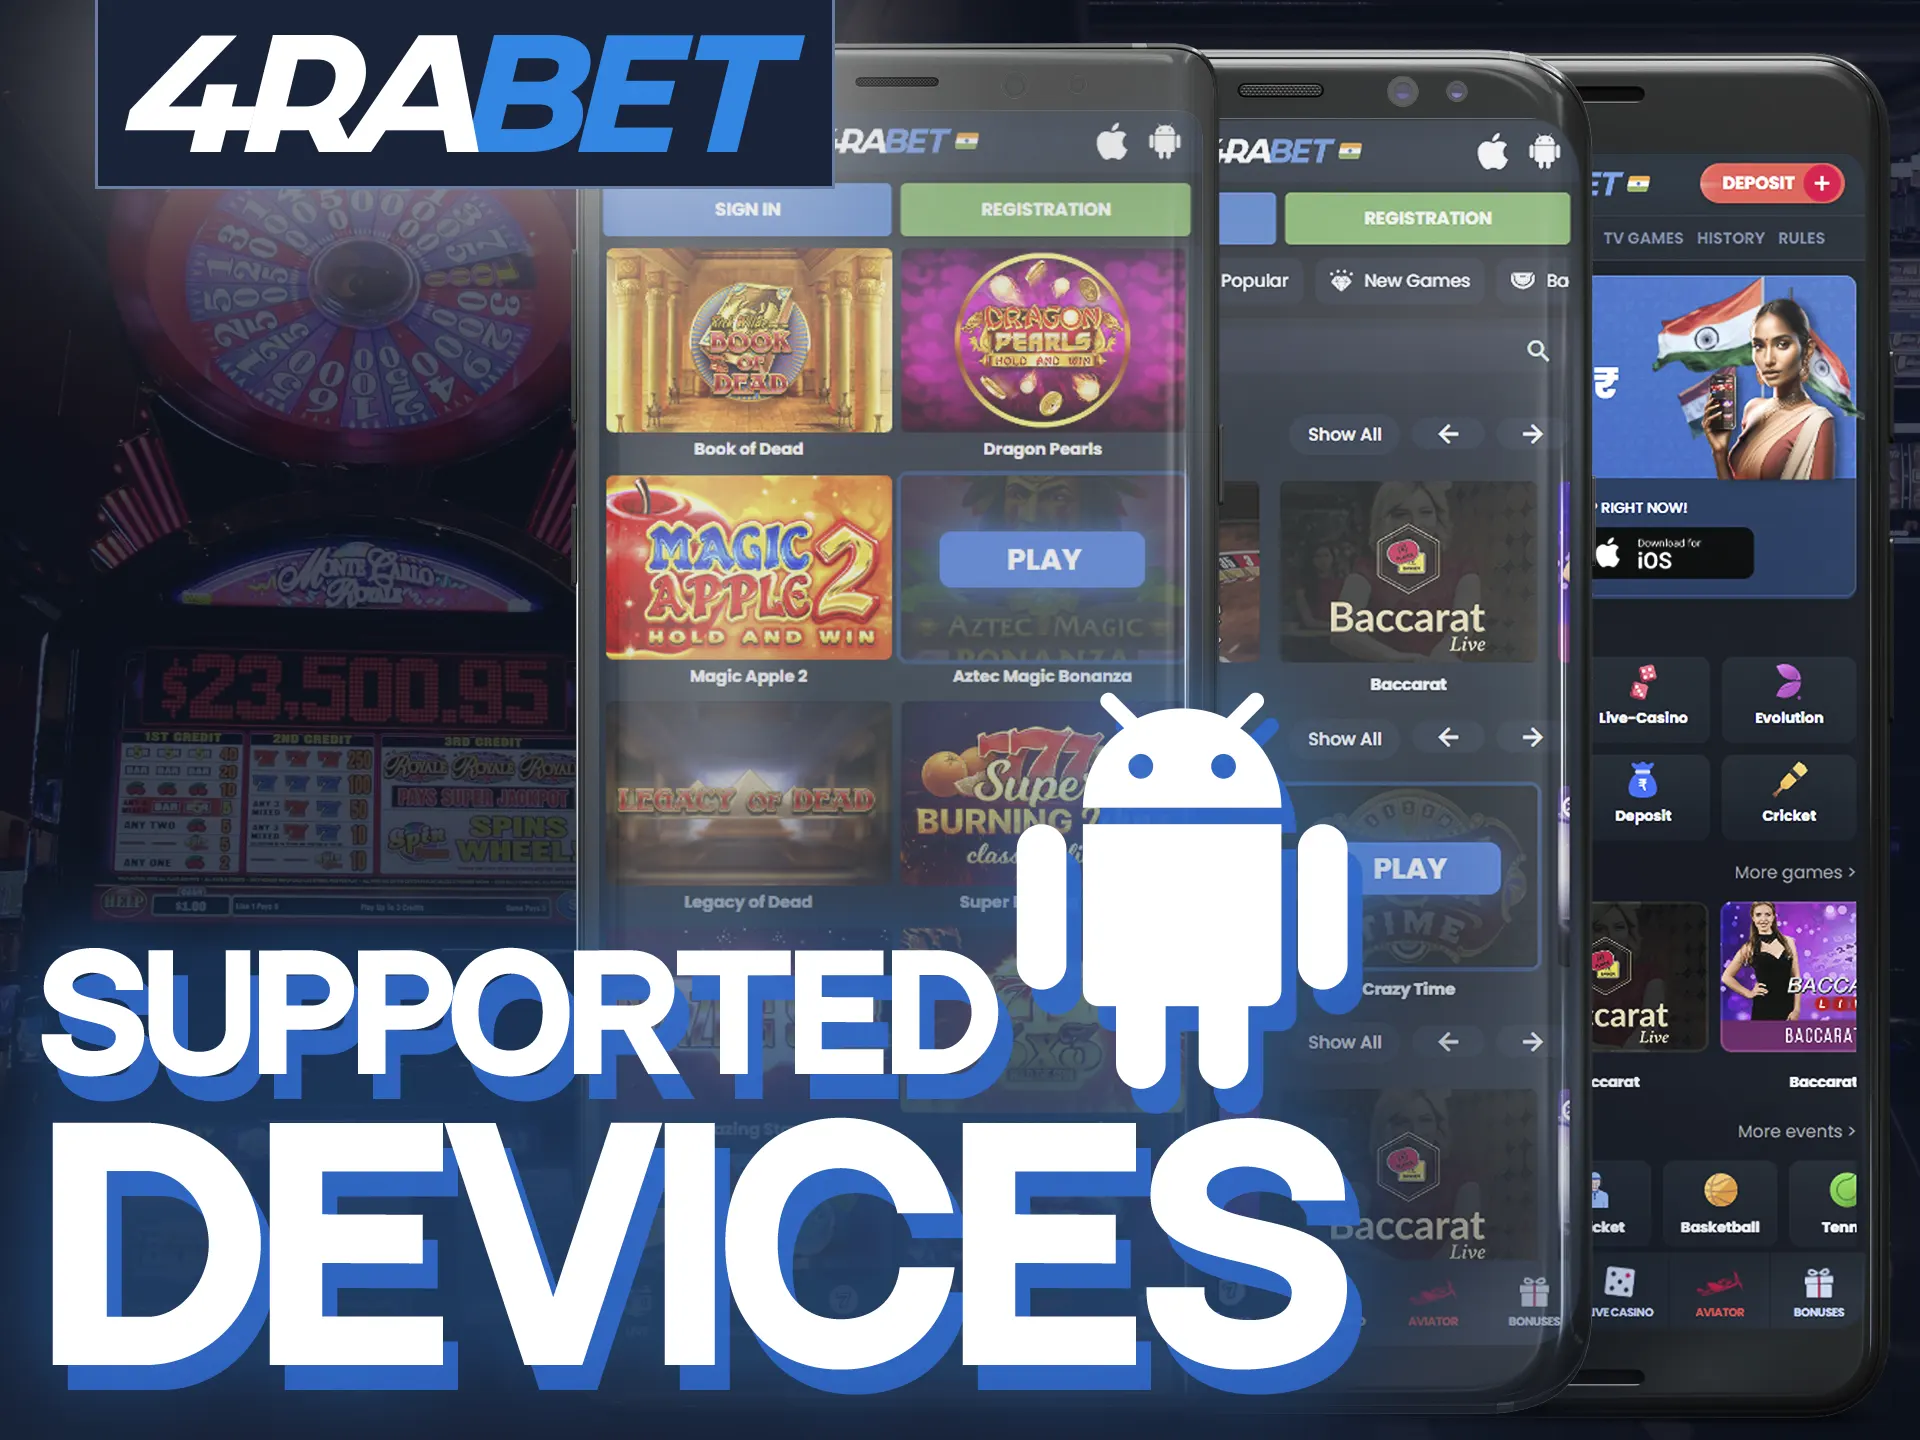 Bet on sports and play casino games with 4Rabet from your Android mobile device.